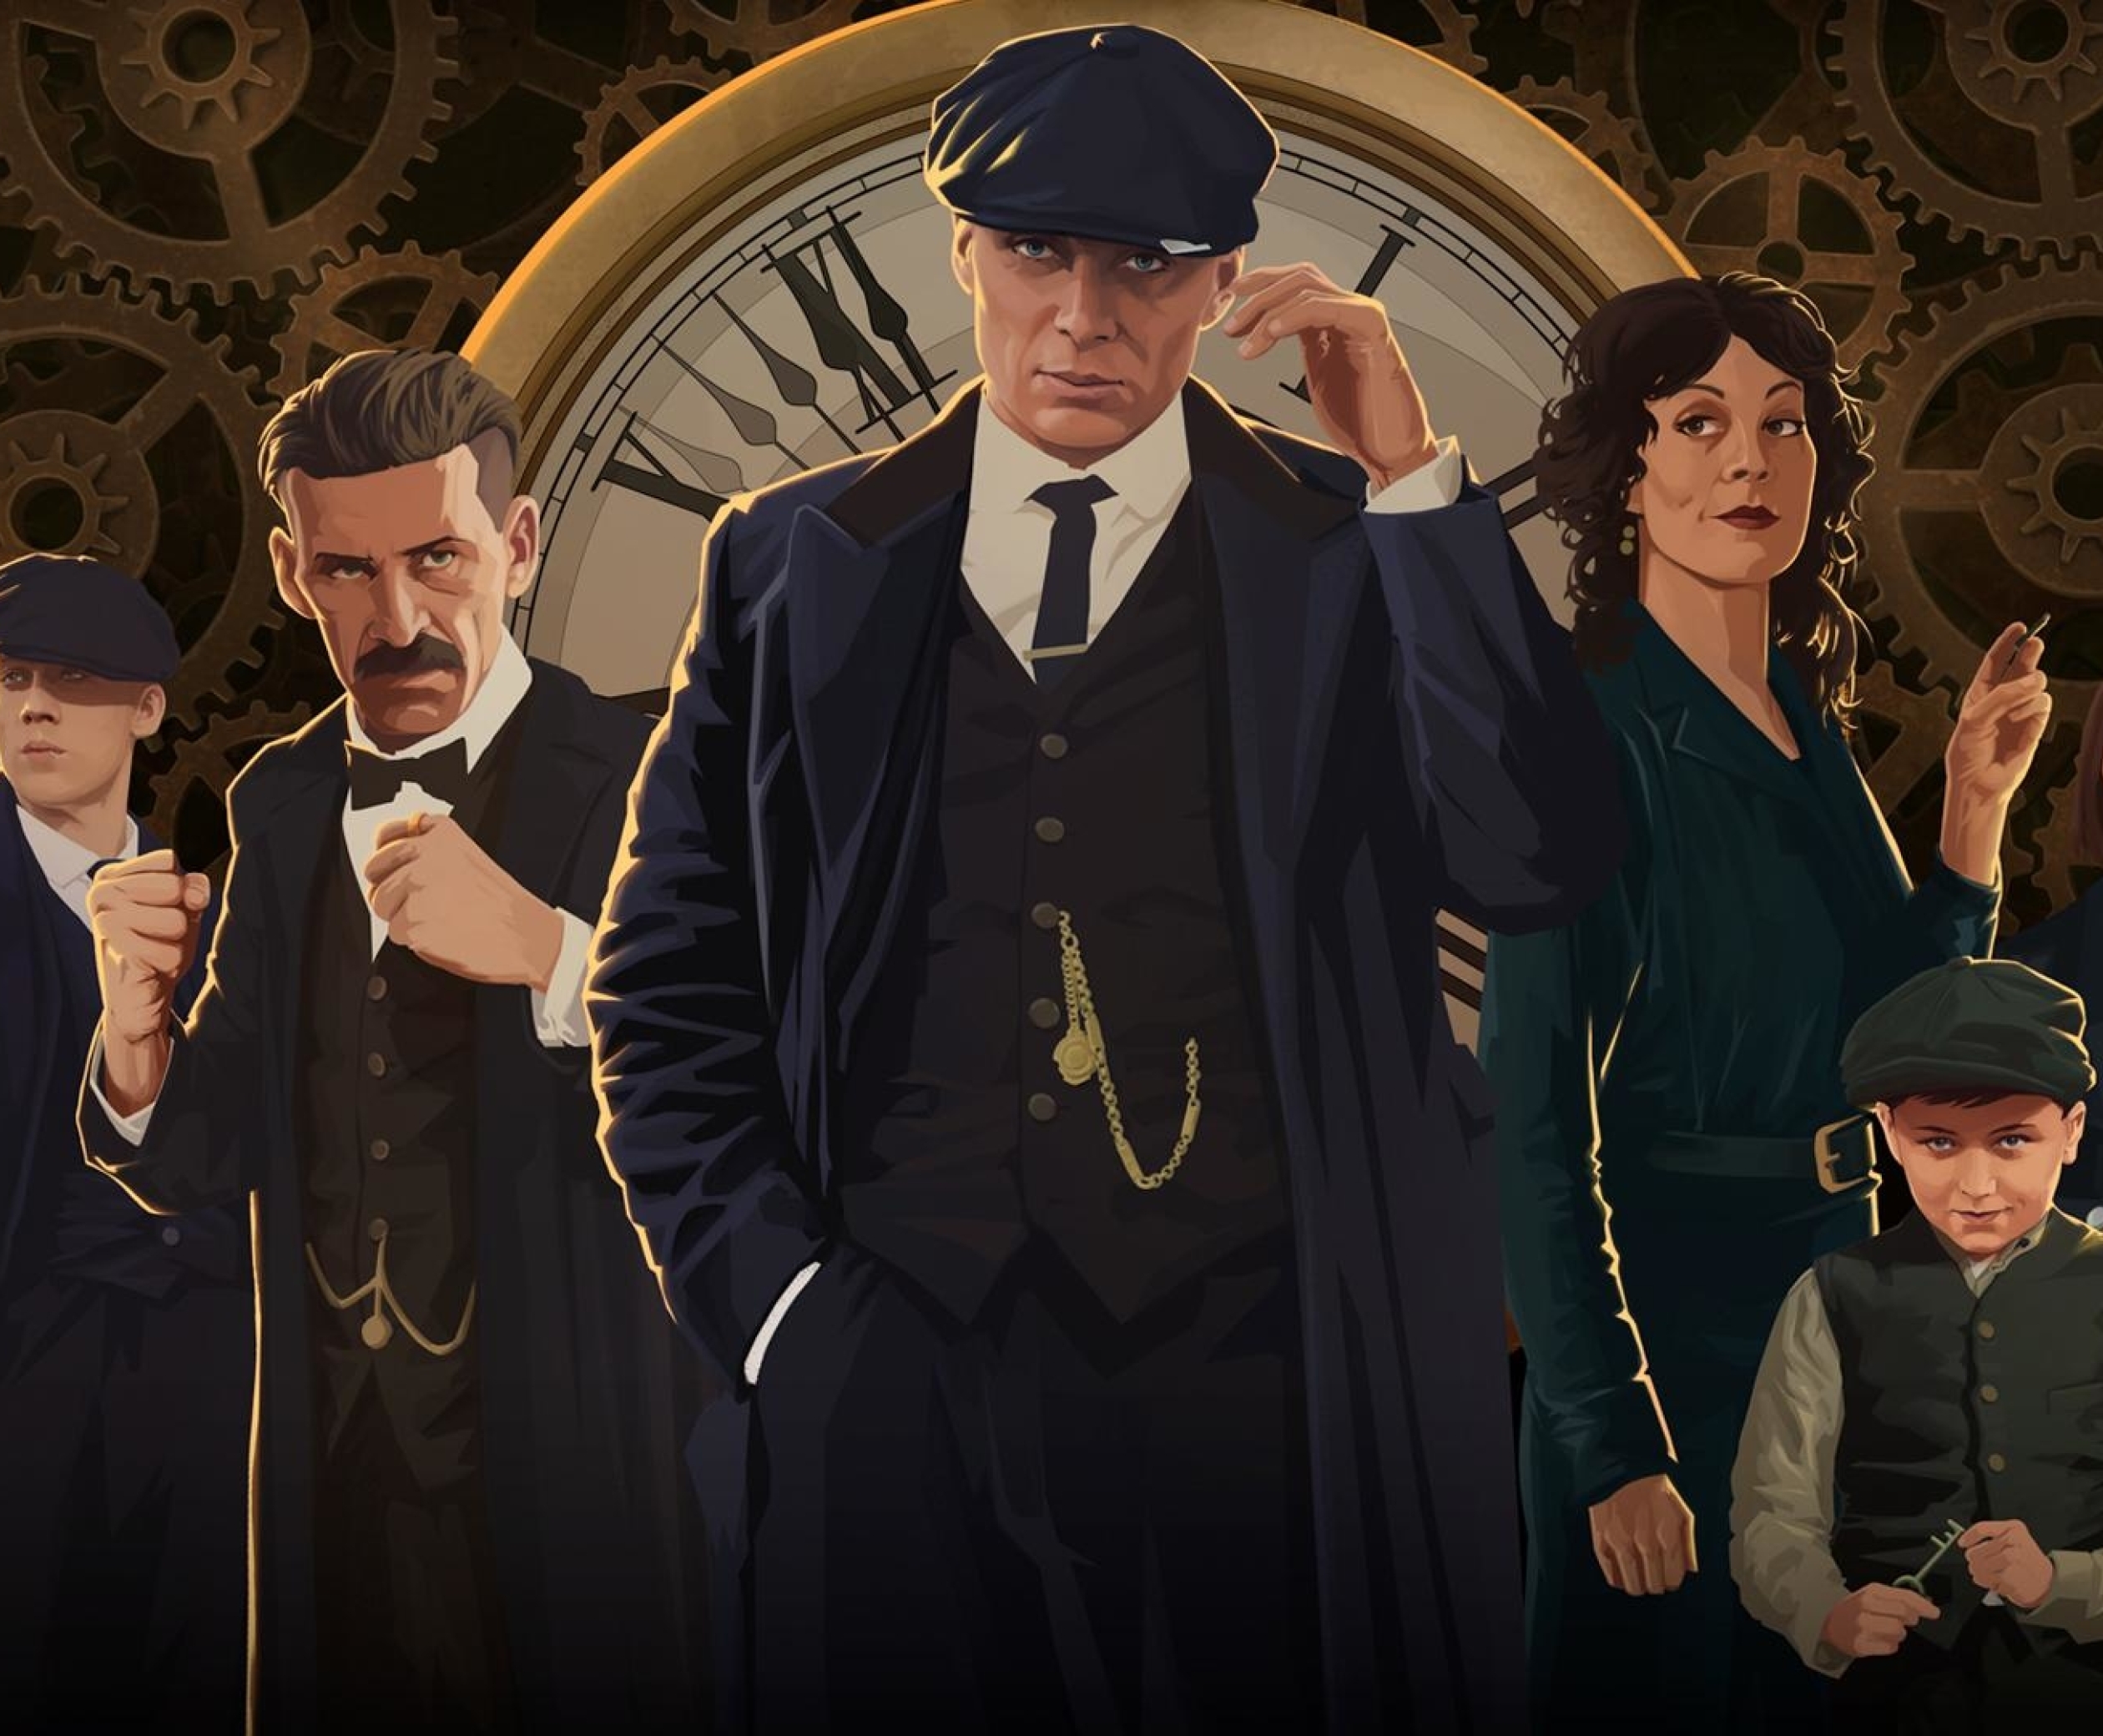 2520x2080 Resolution Peaky Blinders Game 2520x2080 Resolution Wallpaper Wallpapers Den 